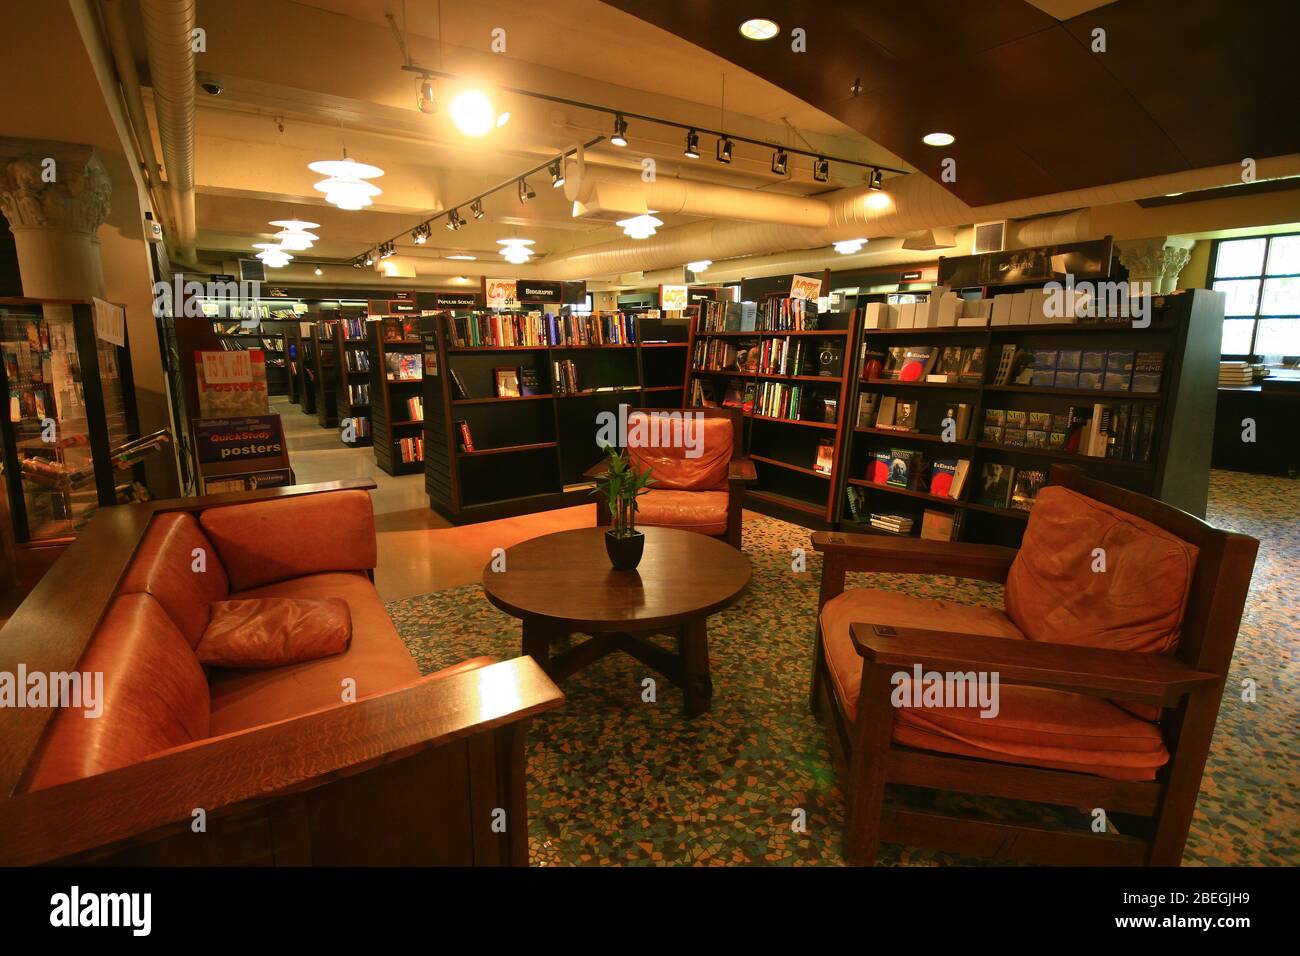 Los Angeles, AUG 12, 2009 - Interior view of book store of the California Institute of Technology Stock Photo